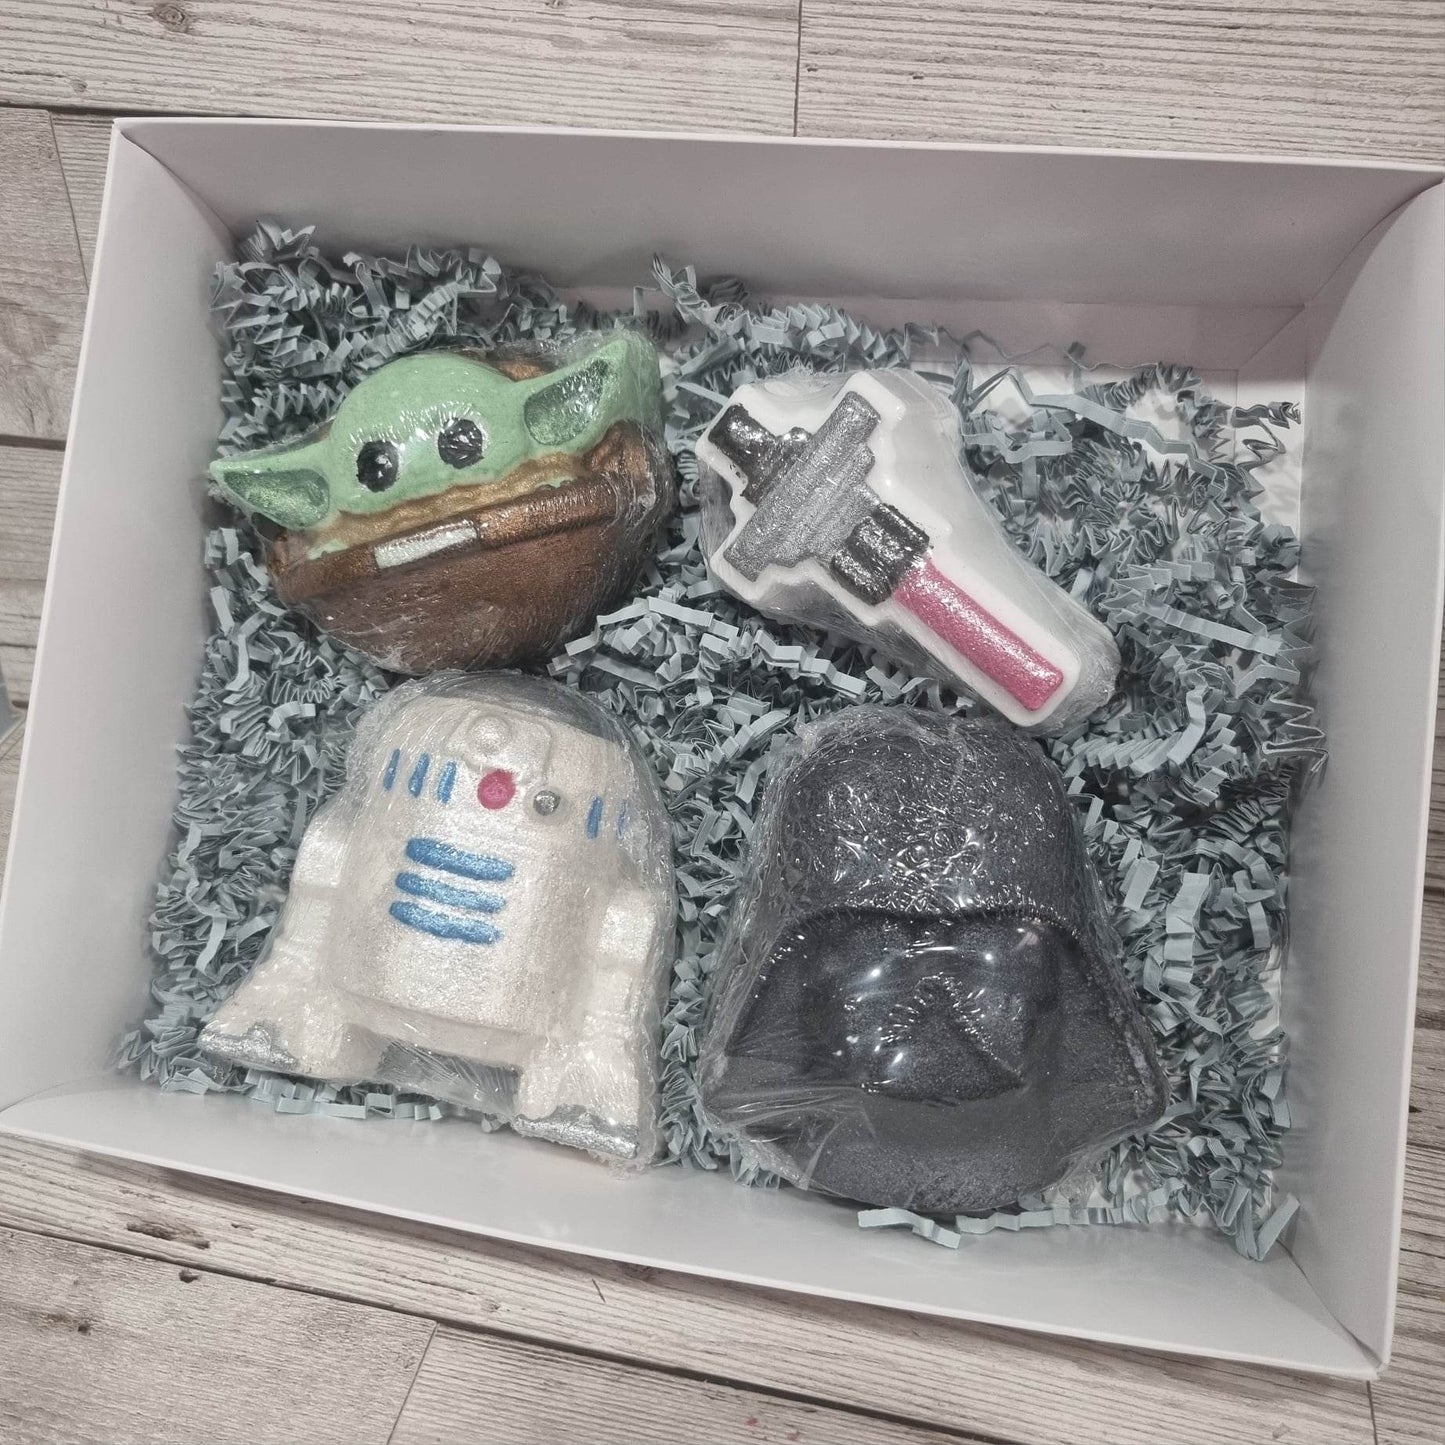 'May the Force be with you' Bath Bomb Gift Set